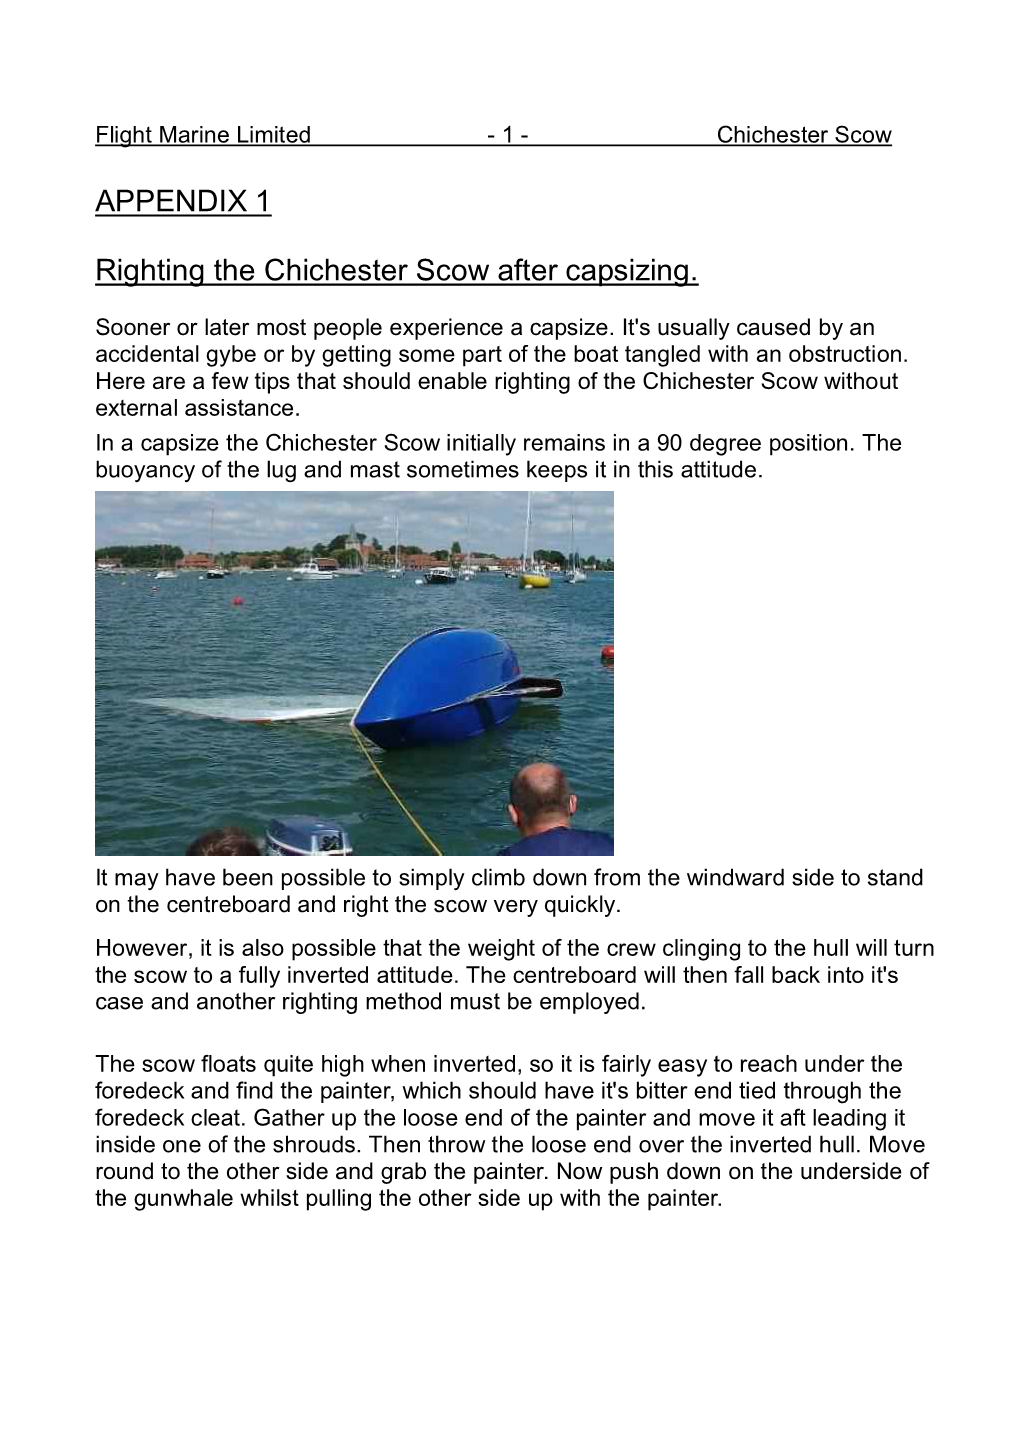 APPENDIX 1 Righting the Chichester Scow After Capsizing